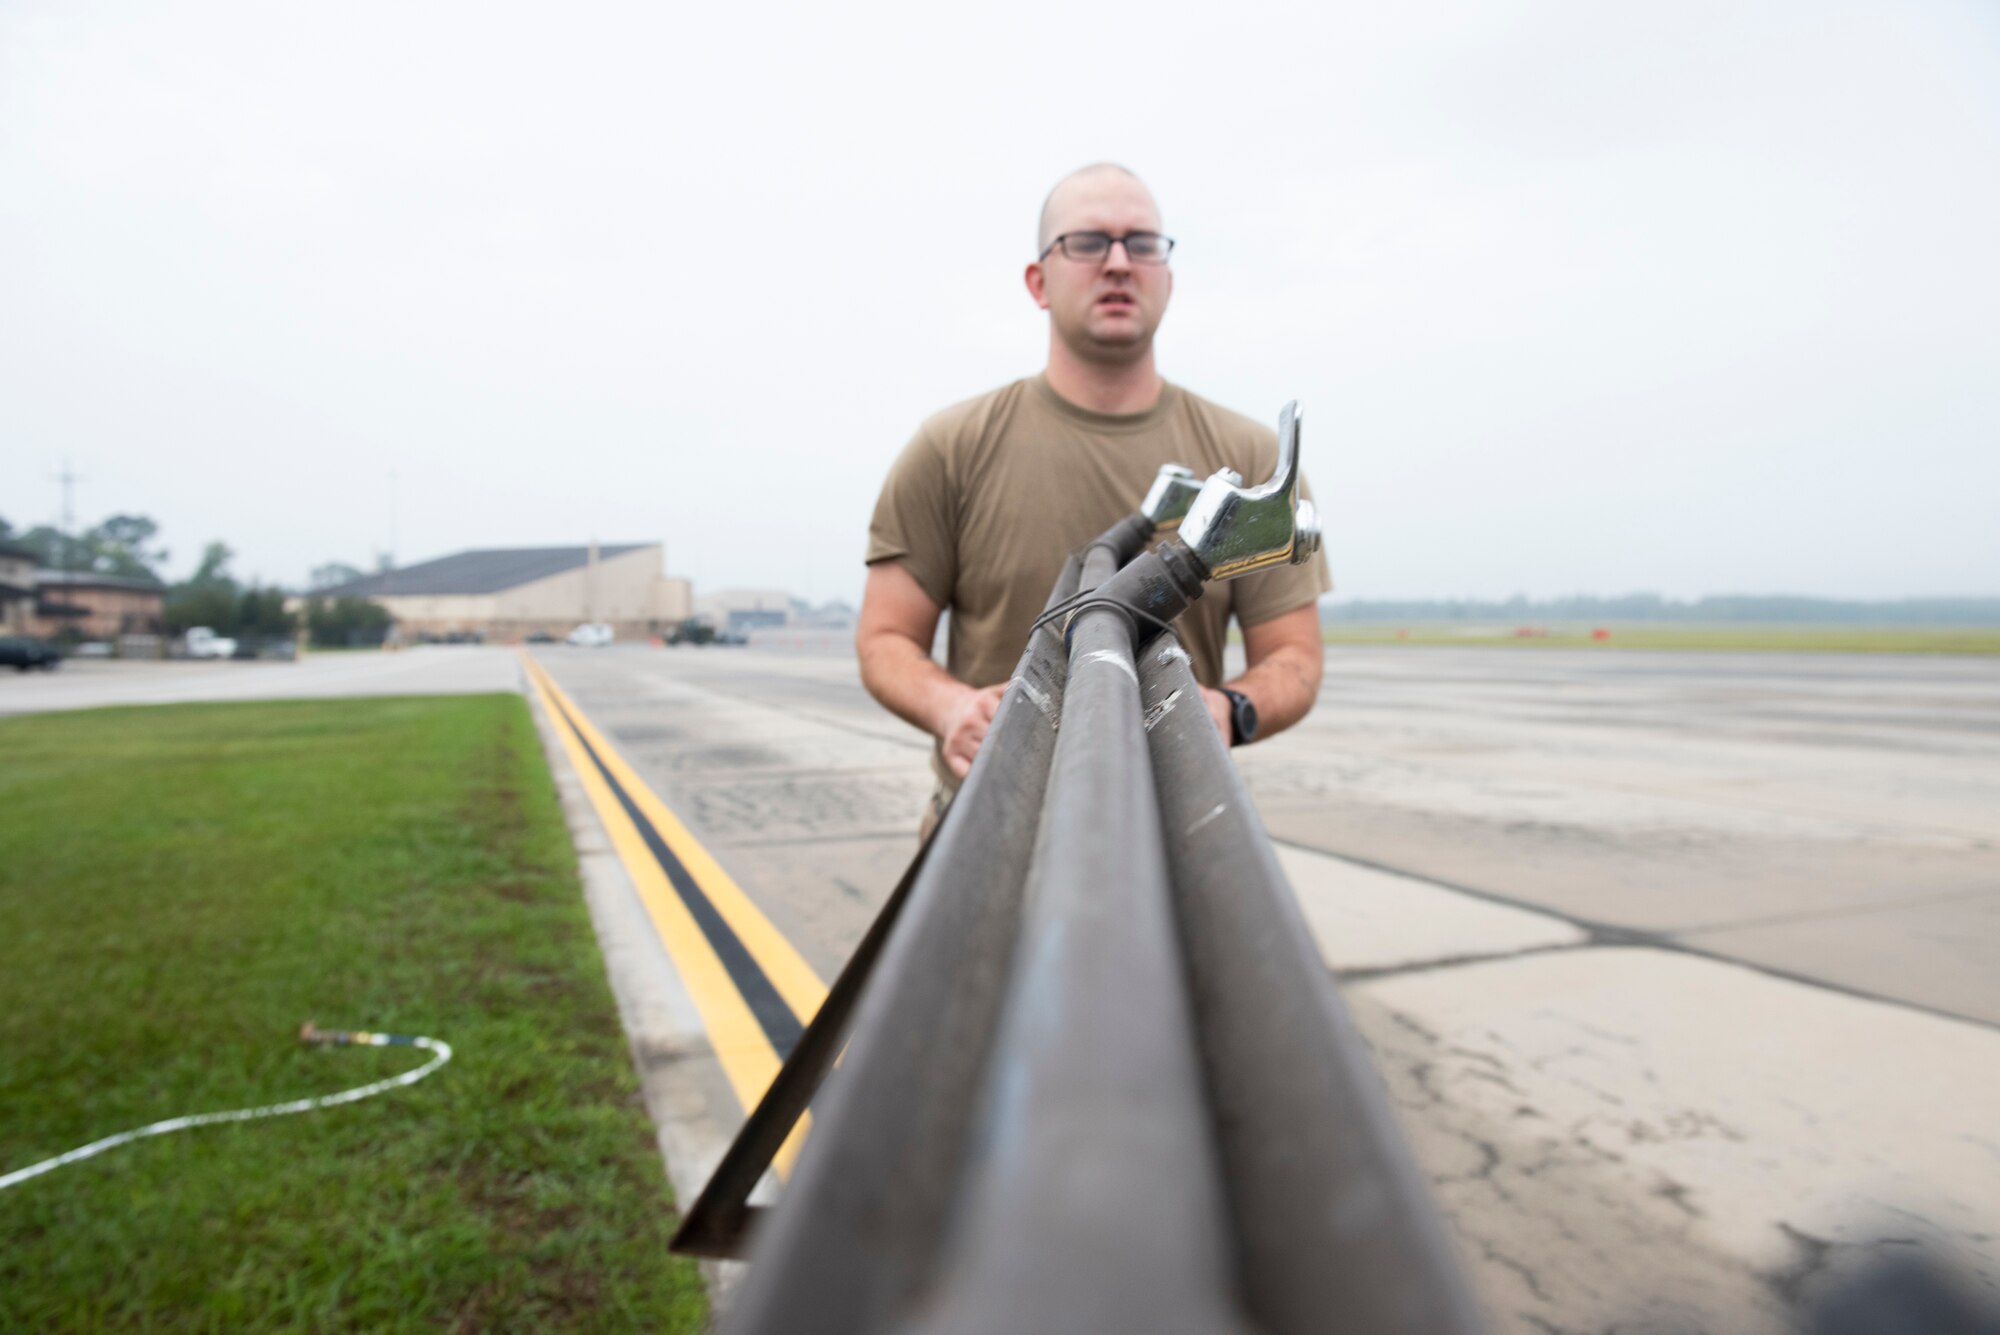 Staff Sgt. Douglas Shaw, 23d Civil Engineer Squadron (CES) water and fuel systems maintenance journeyman, transports water fountains Oct. 29, 2019, at Moody Air Force Base, Ga. The 23d CES installed water fountains around the flightline in preparation for the air show. This will give air show attendees locations for clean water and help with dehydration related injuries. (U.S. Air Force photo by Airman Elijah Dority)